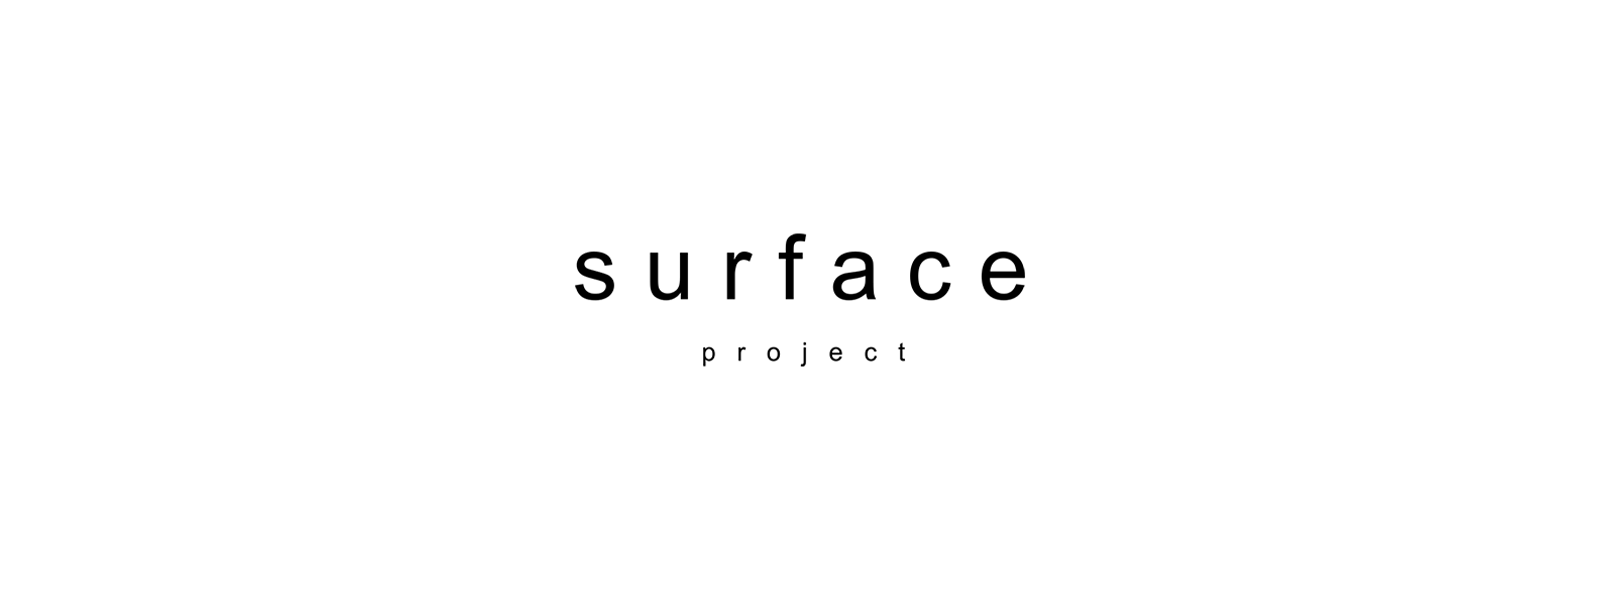 News - Surfaceproject